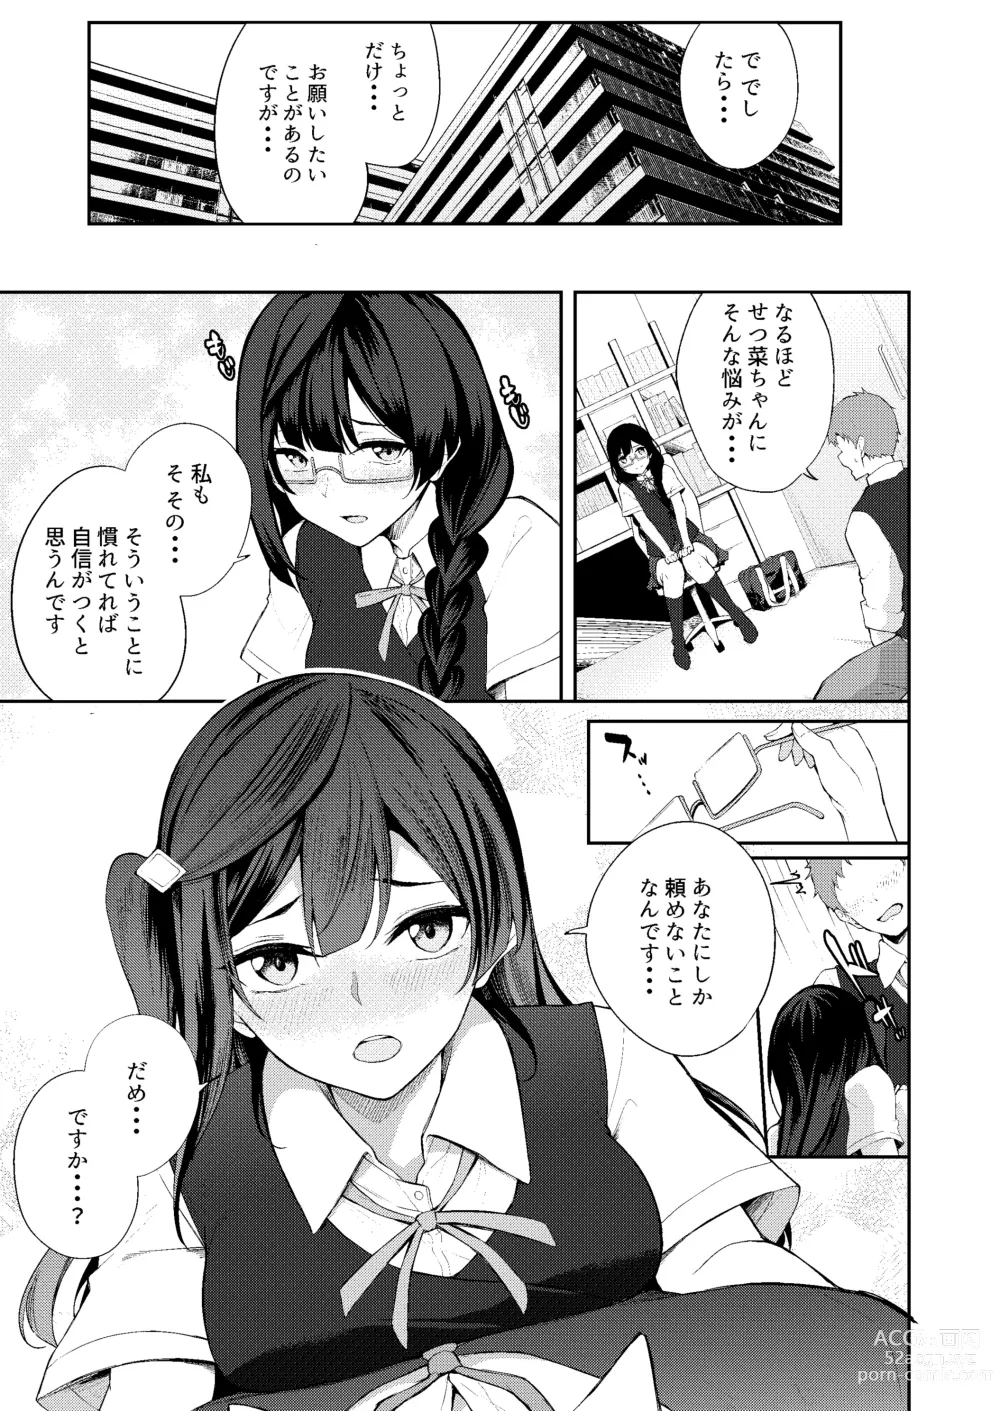 Page 4 of doujinshi Sunny Scarlet